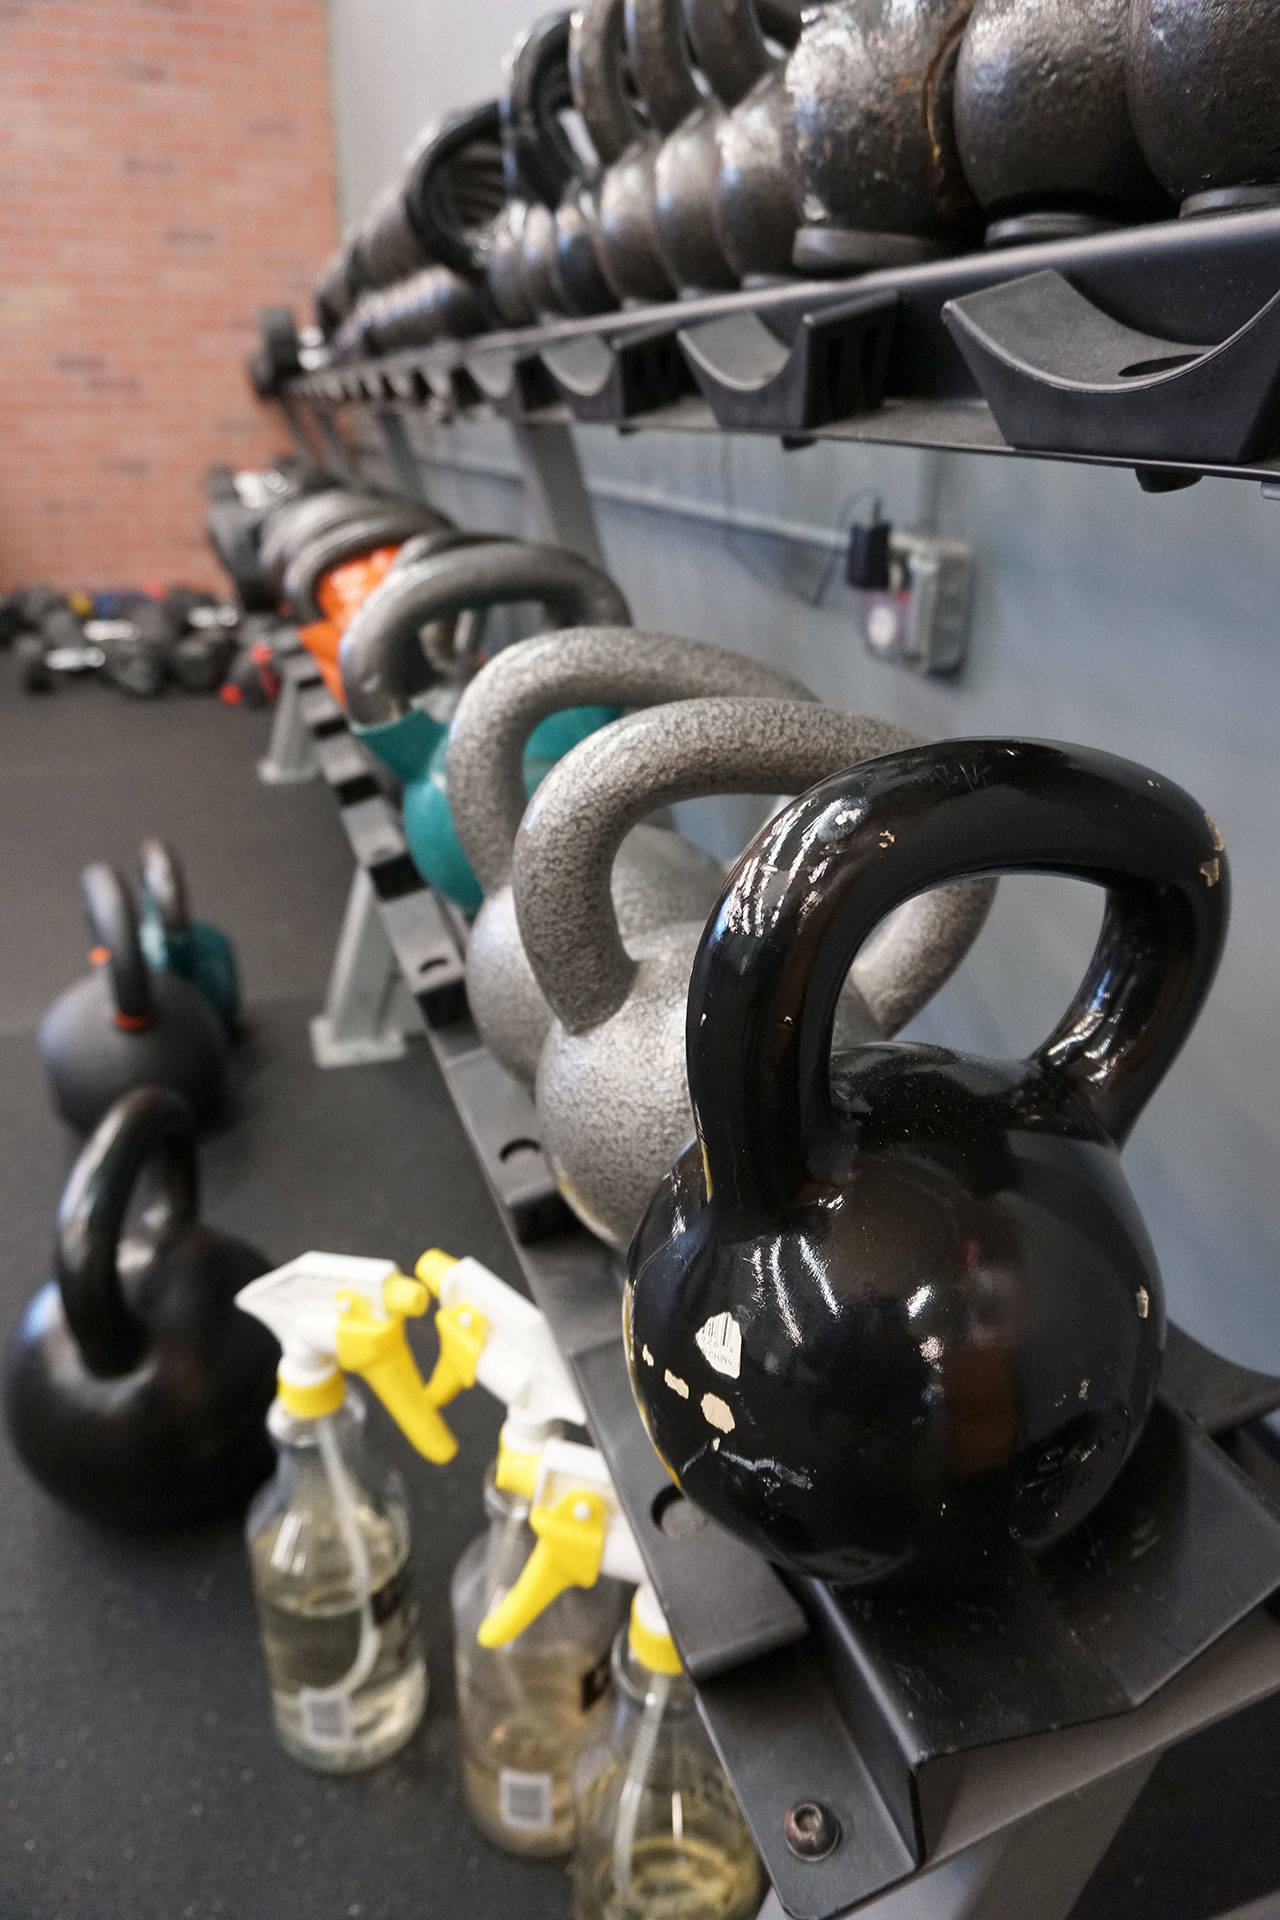 A rack of kettlebells awaits use at Annapolis Fitness Performance. (Mike De Felice photo)